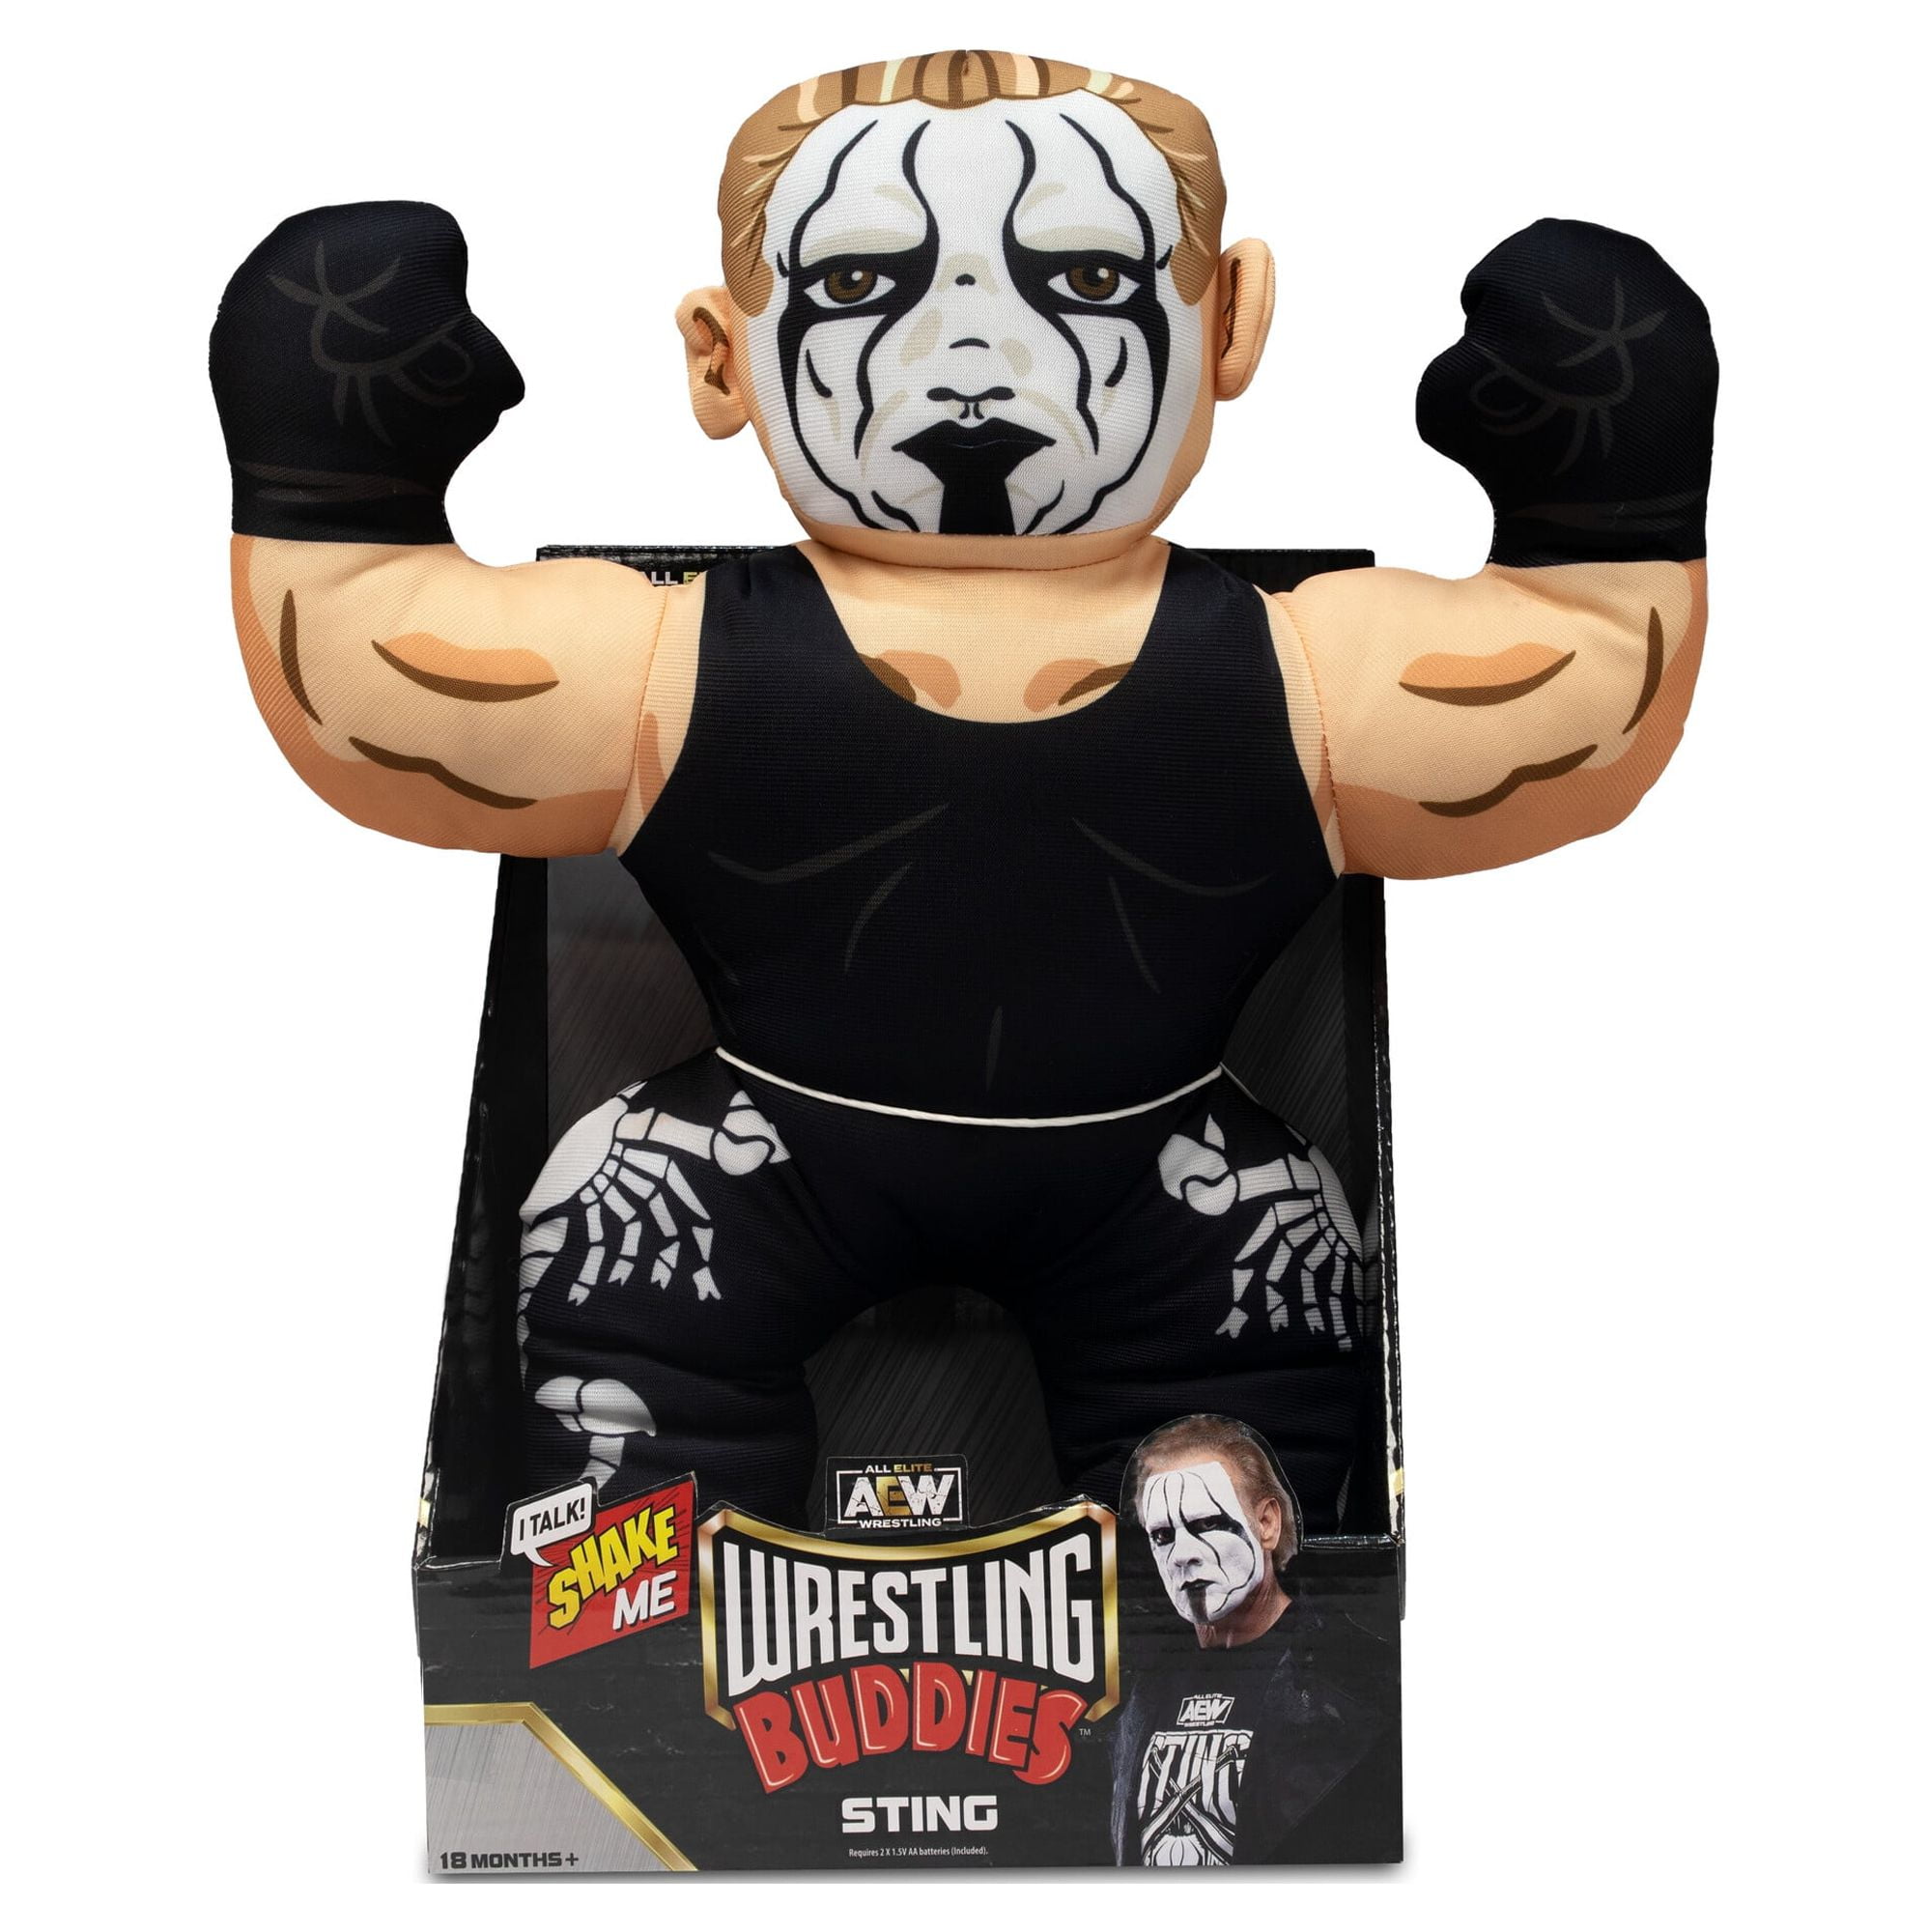 12" AEW Wrestling Buddies Sting Plush Toy w/ Interactive Sounds $8.44 + Free Shipping w/ Walmart+ or on $35+